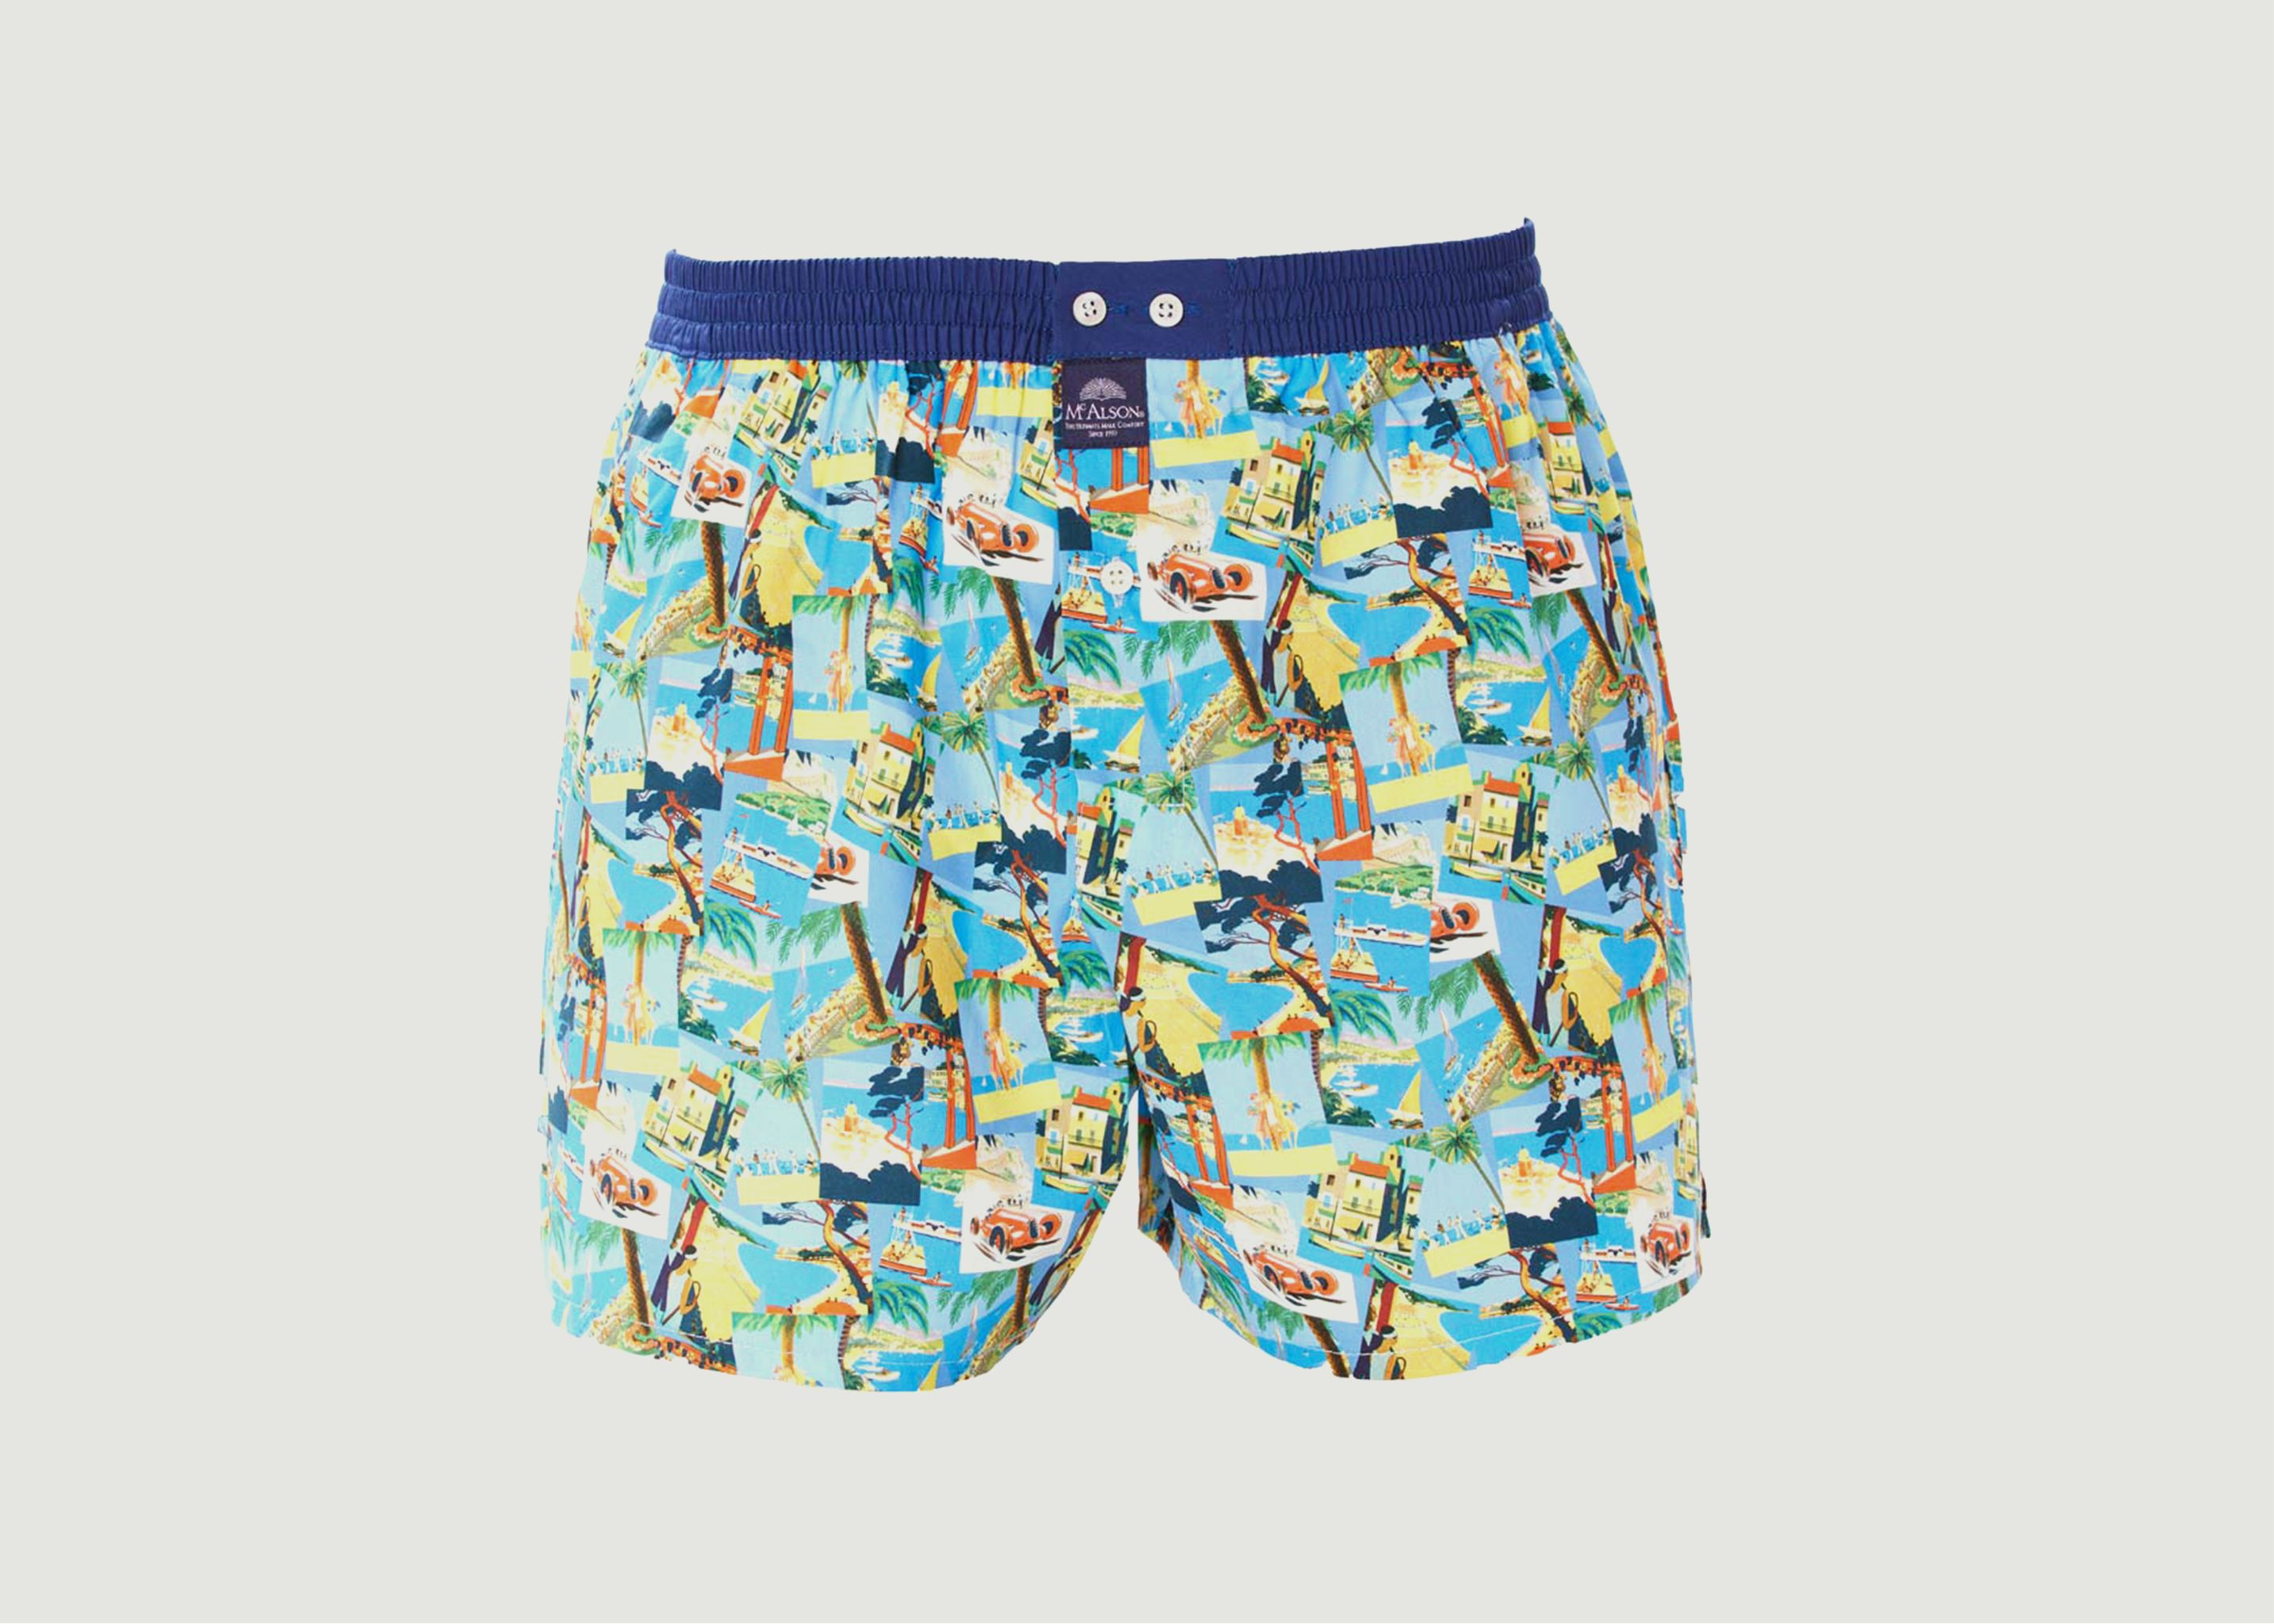 Printed cotton boxer shorts with vacation theme - Mc Alson